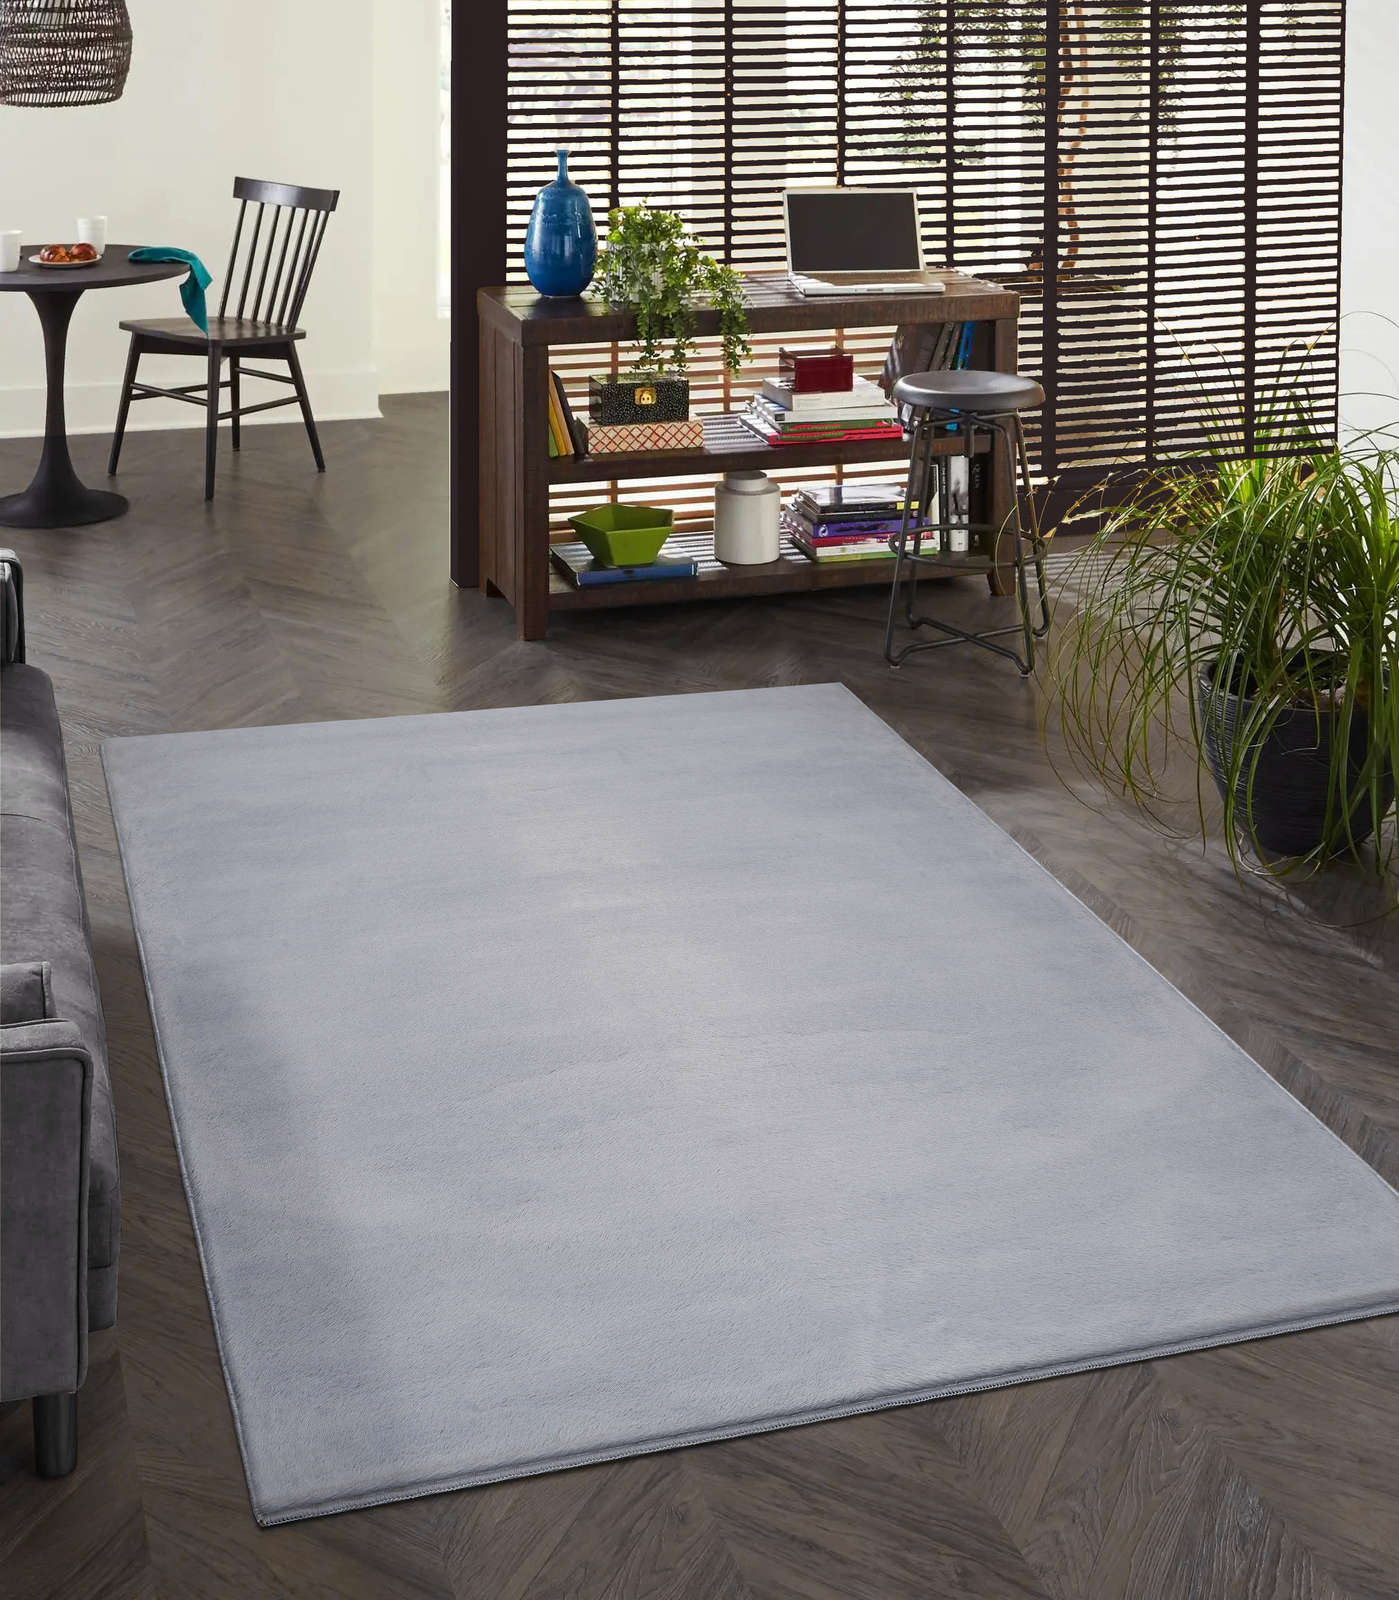             Comfortable high pile carpet in soft grey - 280 x 200 cm
        